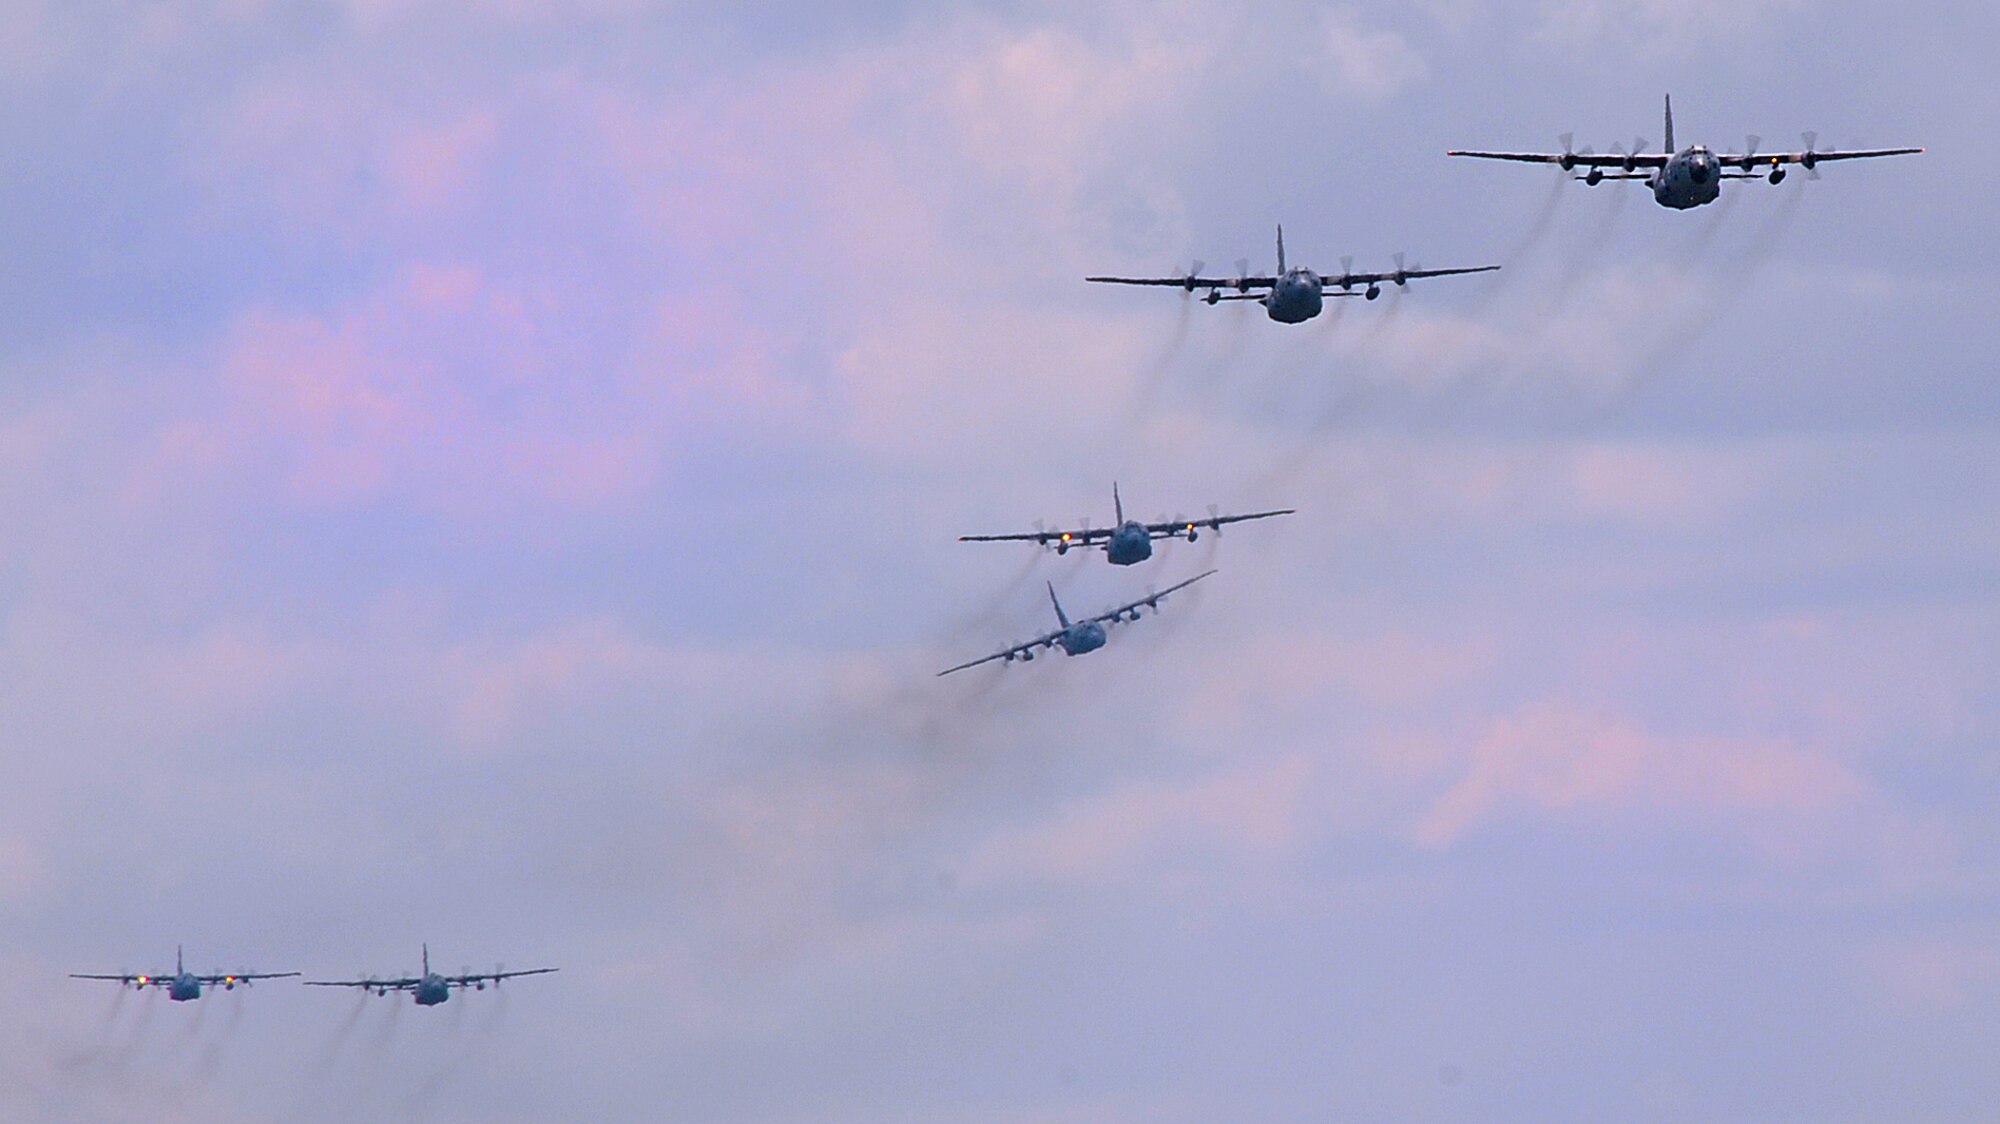 Six C-130s from the 94th Airlift Wing fly over Dobbins Air Reserve Base, Ga. during a formation flight on July 9, 2016. The formation's flight path traversed over the metro Atlanta area and gave the wing's Airmen a chance to showcase their skills in view of the local community.(U.S. Air Force photo by Staff Sgt. Alan Abernethy)